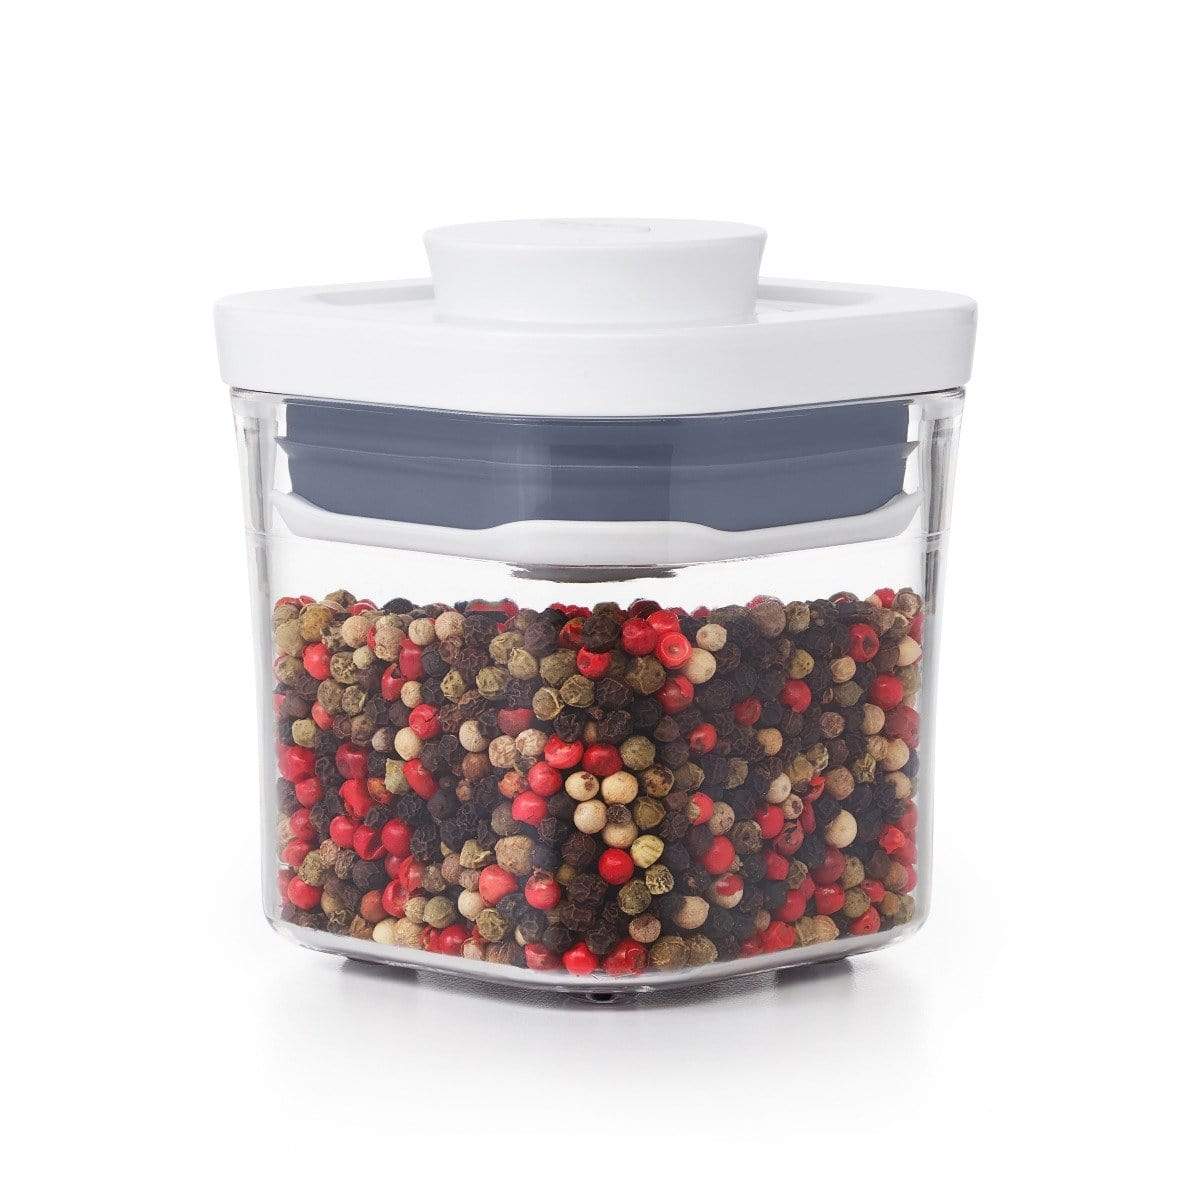 https://cdn.shopify.com/s/files/1/0474/2338/9856/products/oxo-oxo-2-qt-pop-square-canister-38872-29626554056864_1600x.jpg?v=1628150216